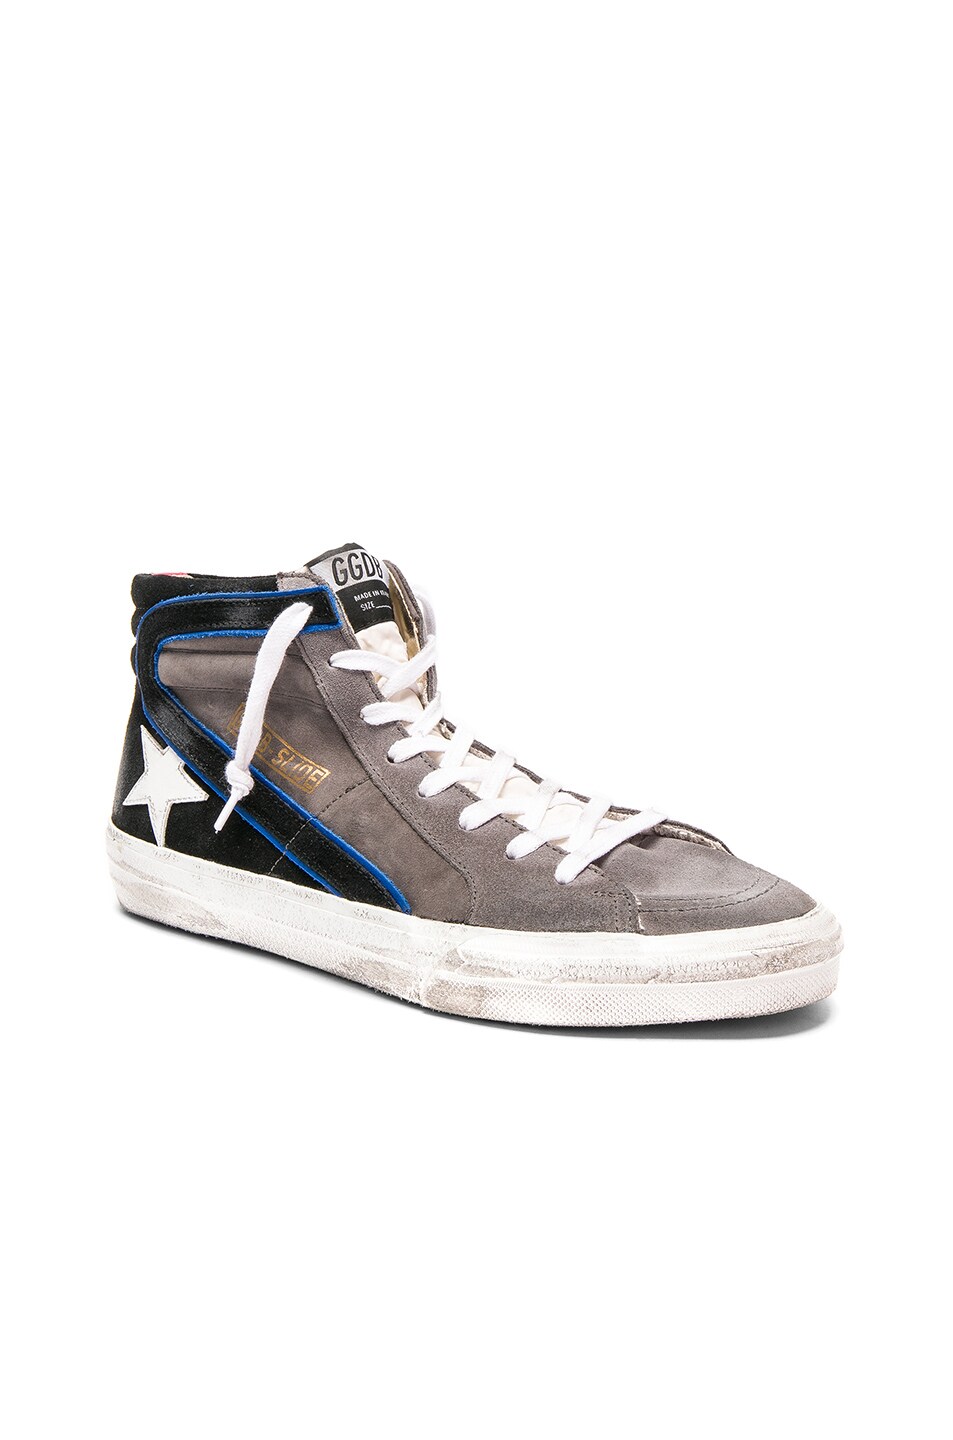 Image 1 of Golden Goose Slide Sneakers in Lavagna Suede & White Star